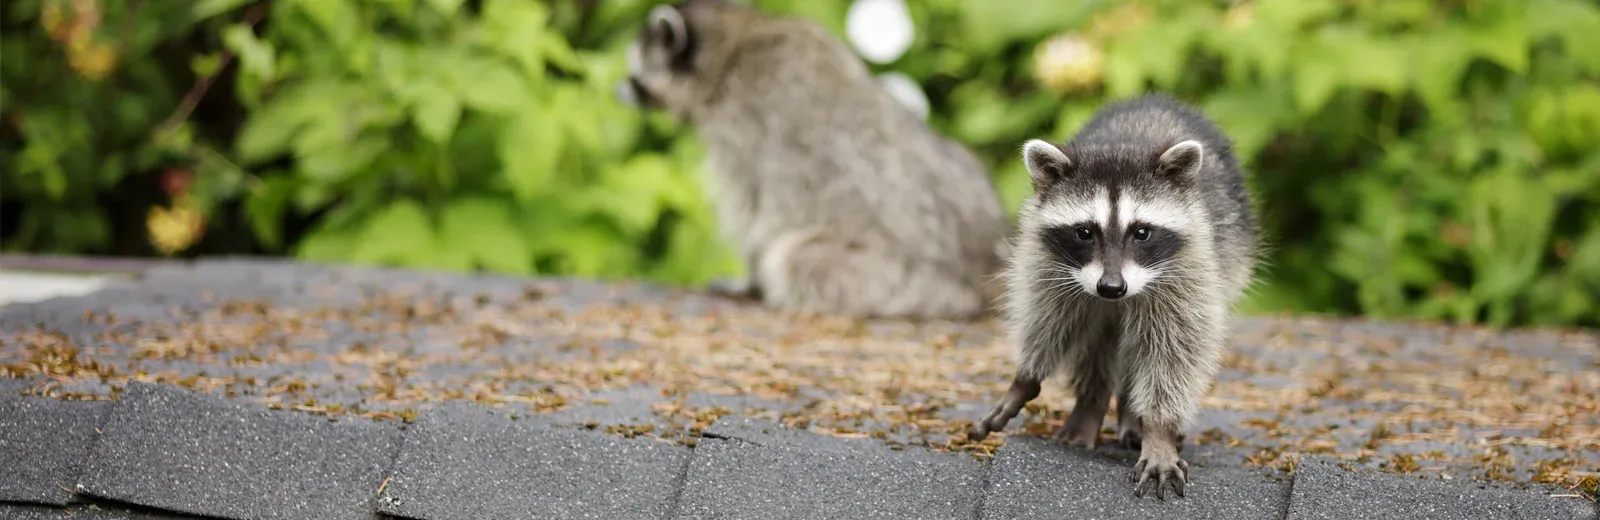 raccoon on roof of house